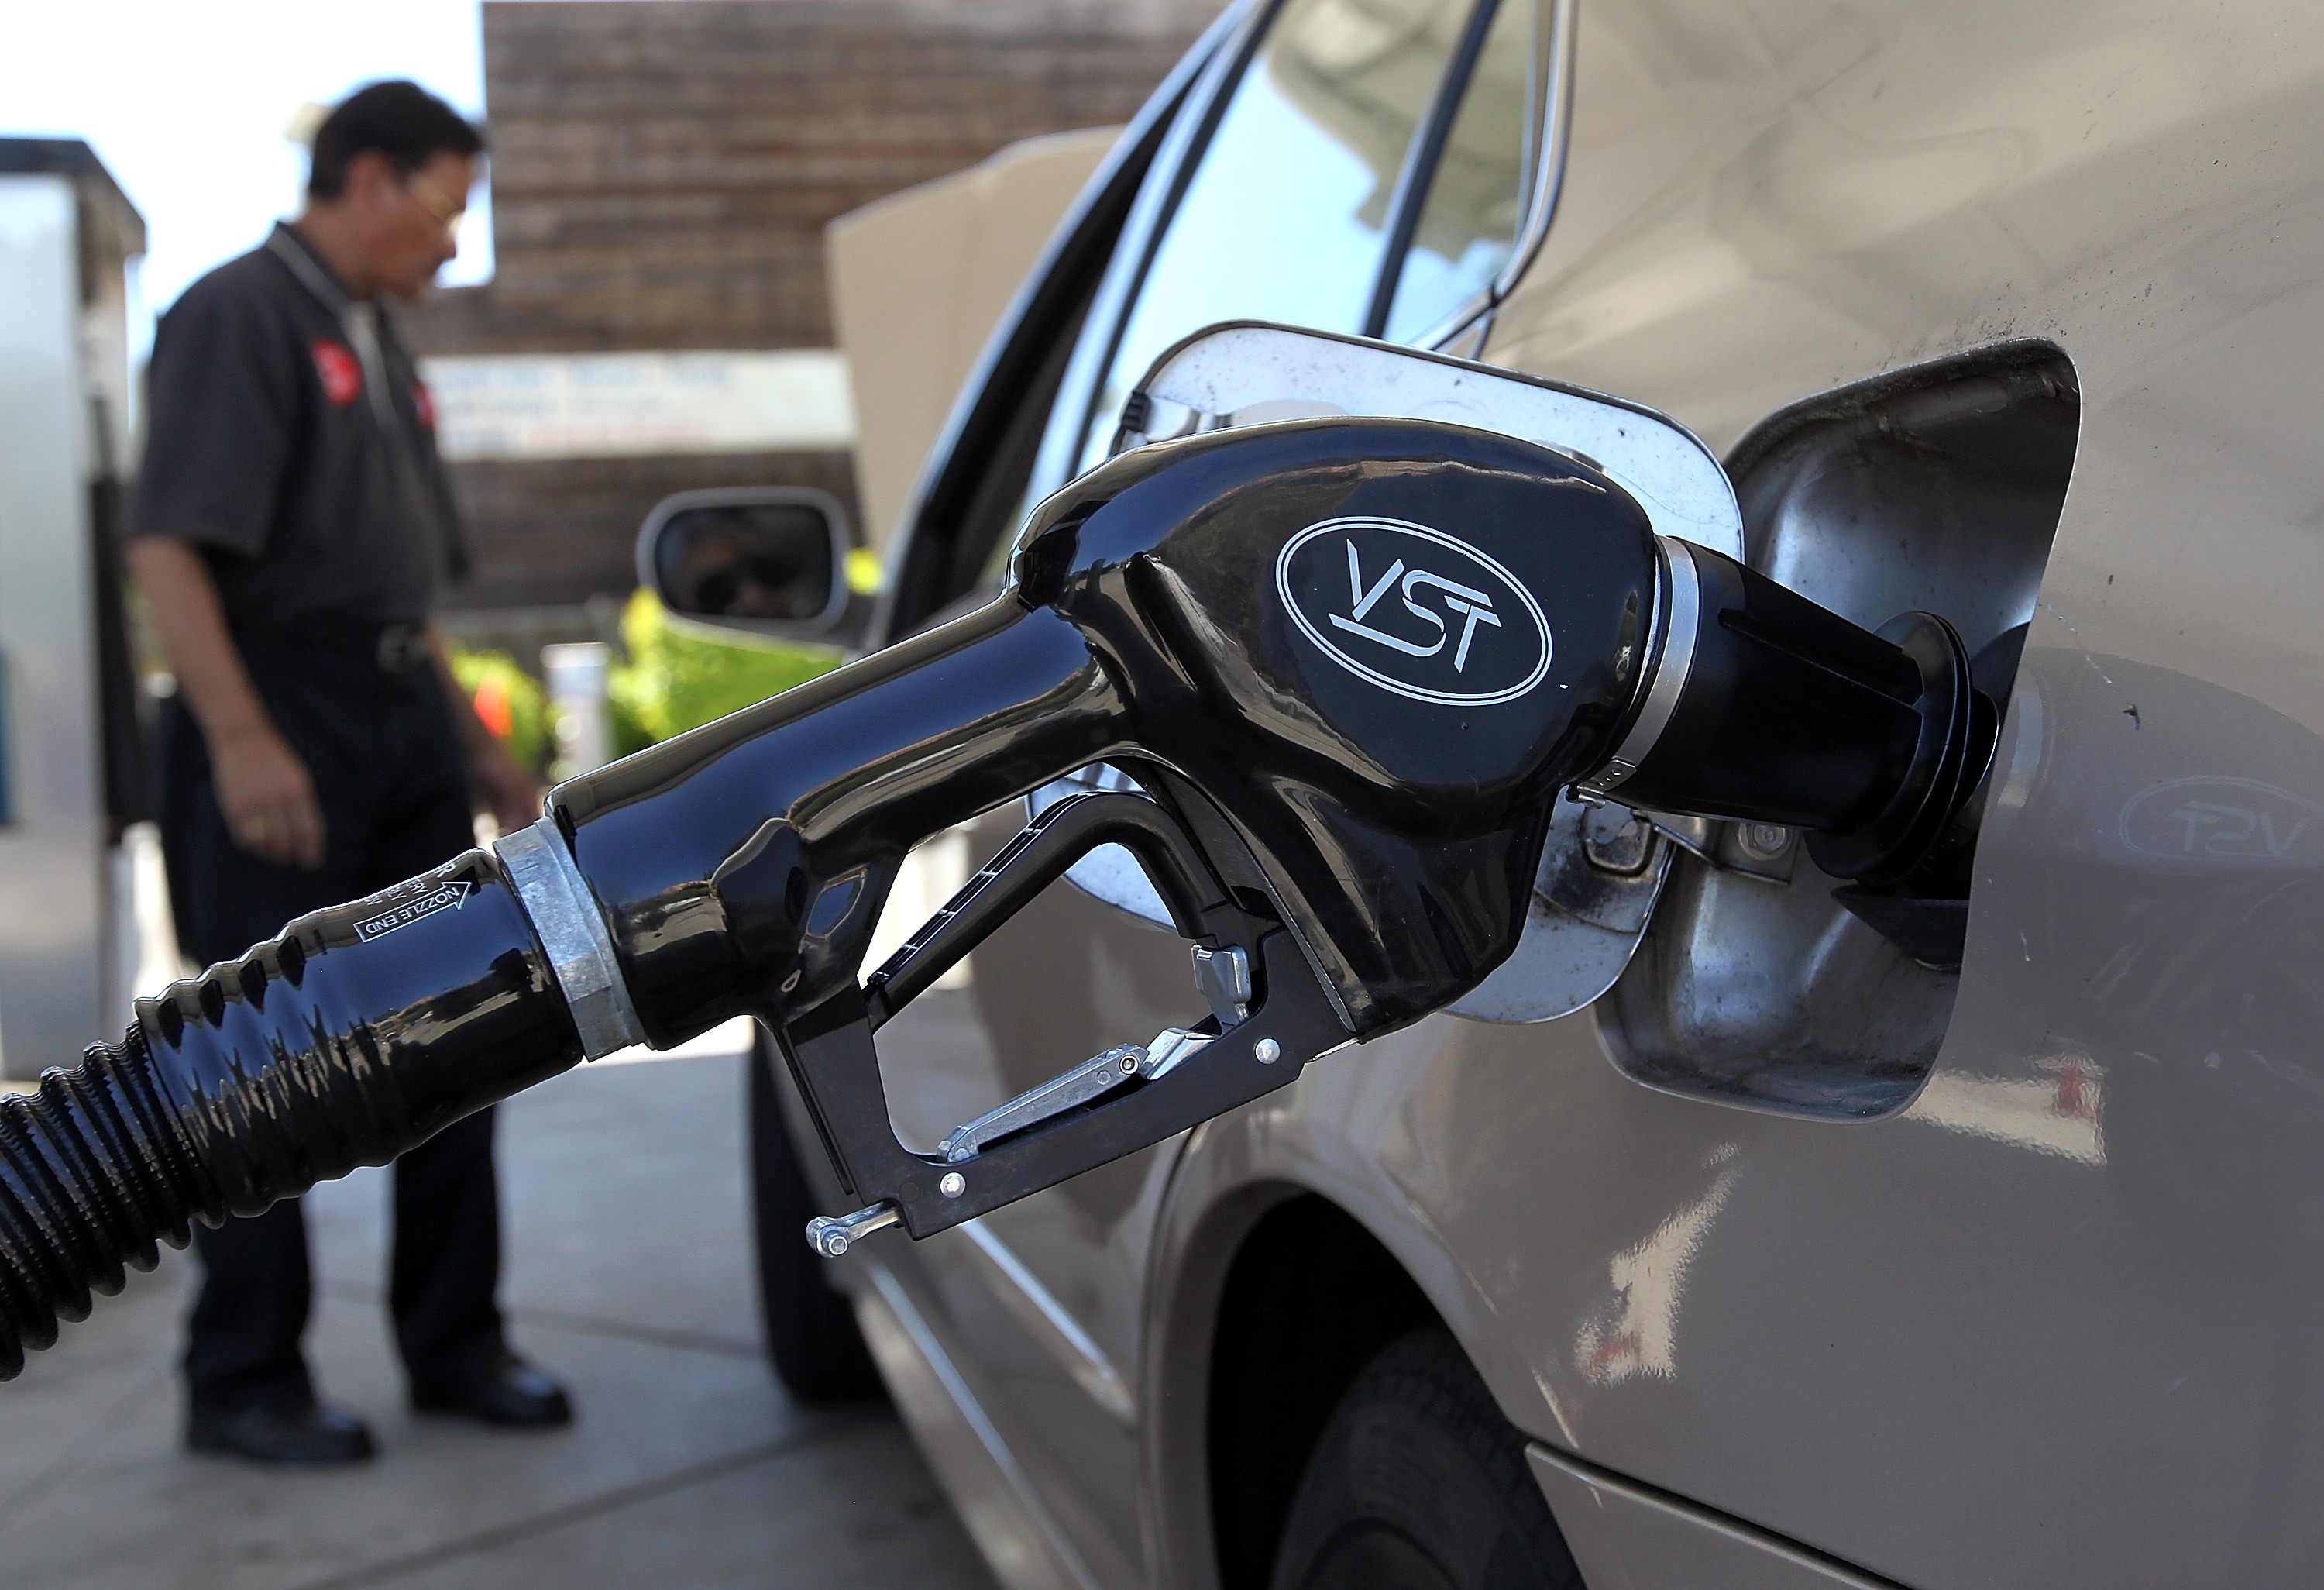 A gasoline pump rests in the tank of a car on June 12, 2012 in San Anselmo, California. (Justin Sullivan&mdash;Getty Images)